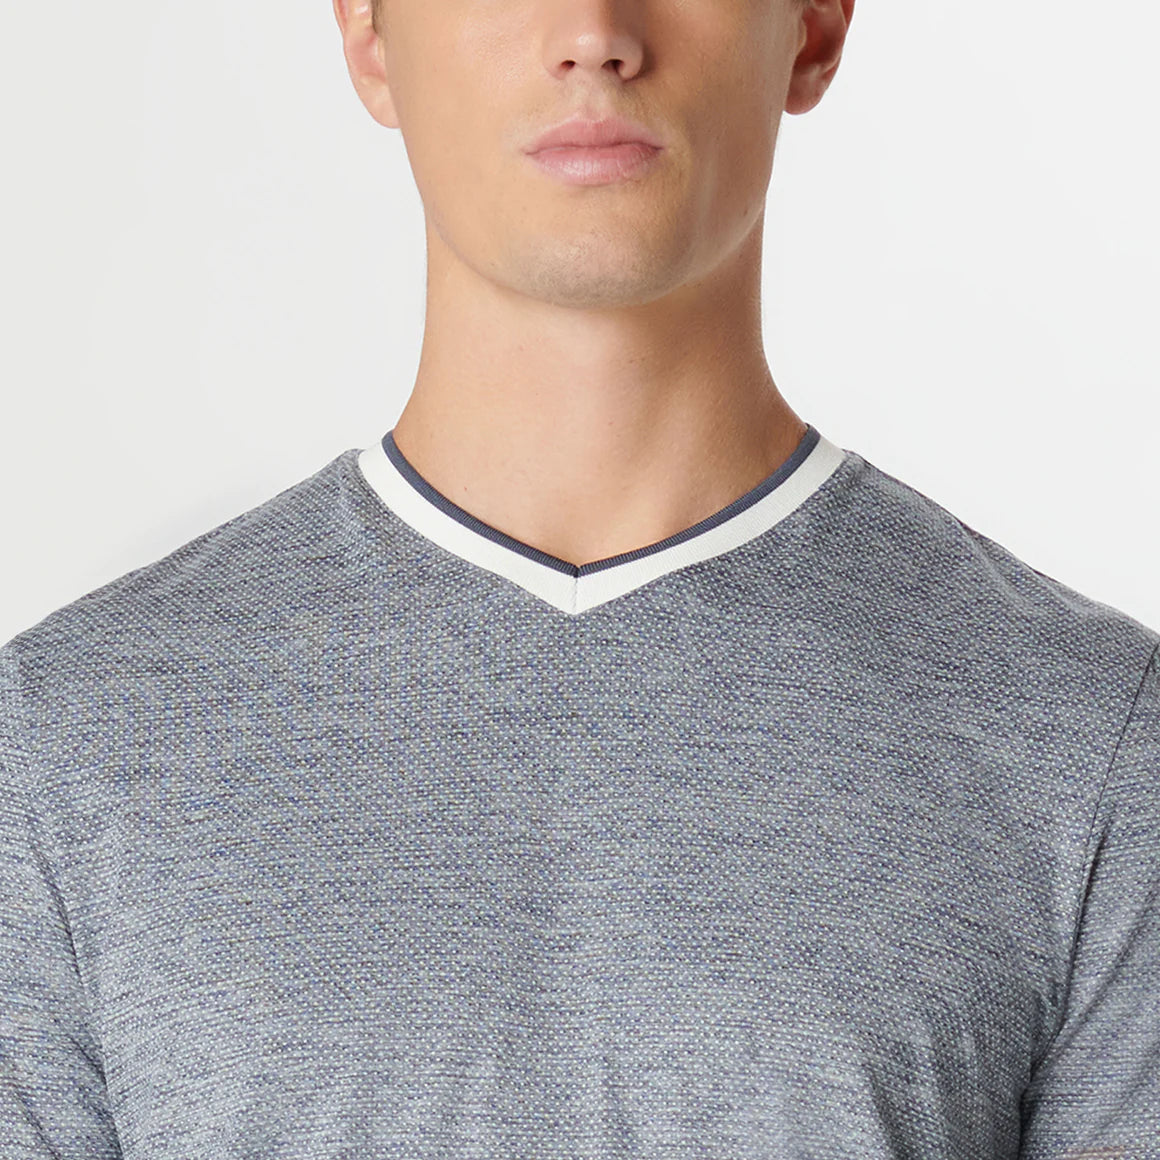 This performance short-sleeved V-neck shirt features a stylish speckled heather pattern with contrast neckline. Beyond style, this garment offers UV50 SPF protection, making it perfect for outdoor activities.